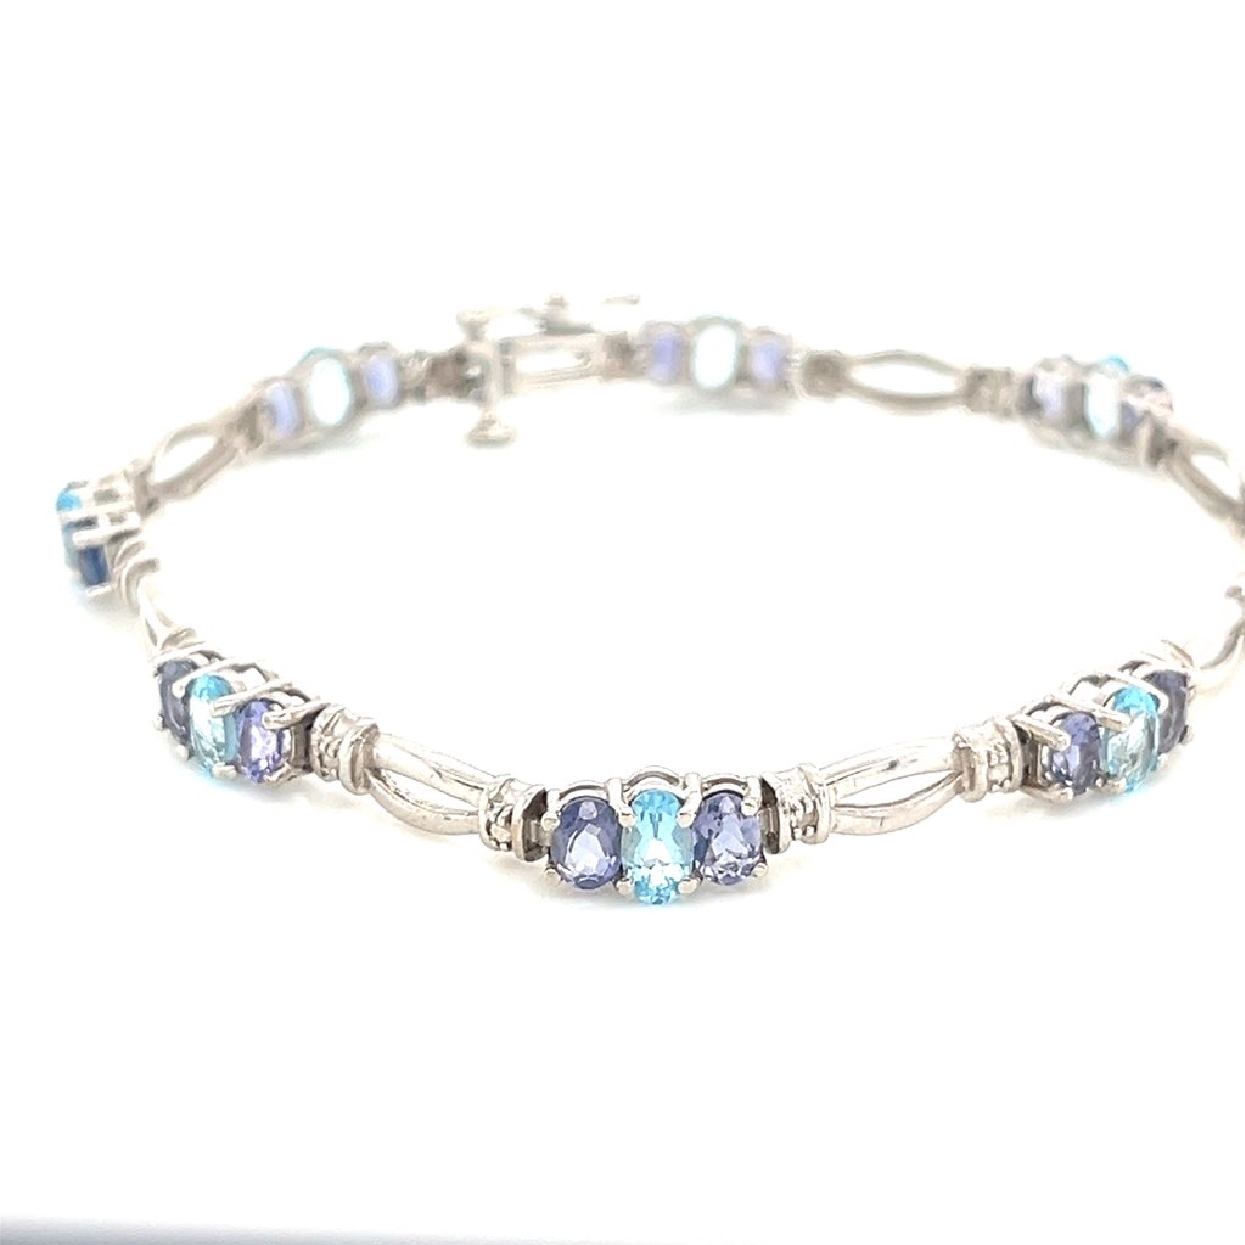 14K White Gold Bracelet with Amethyst and Blue Topaz 

7Inches